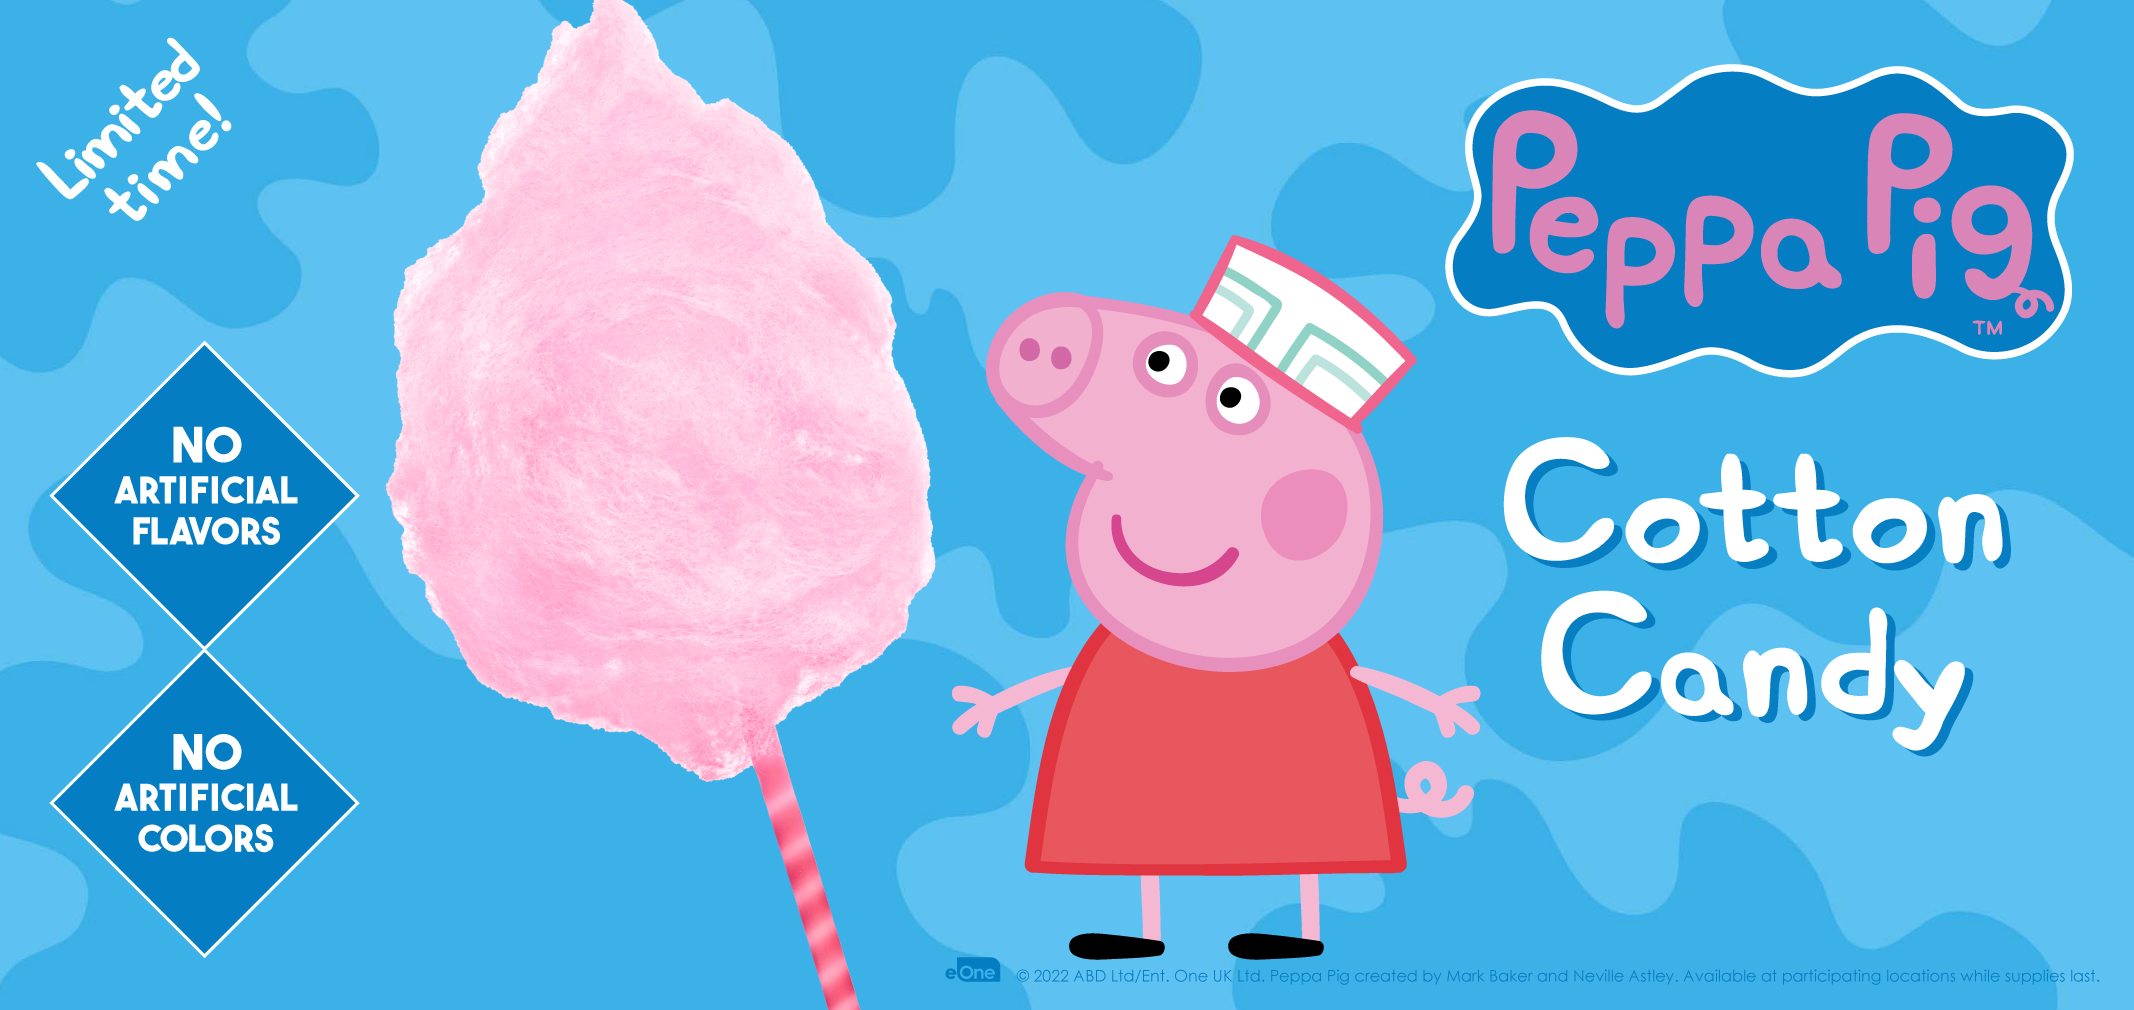 peppa pig cotton candy label image